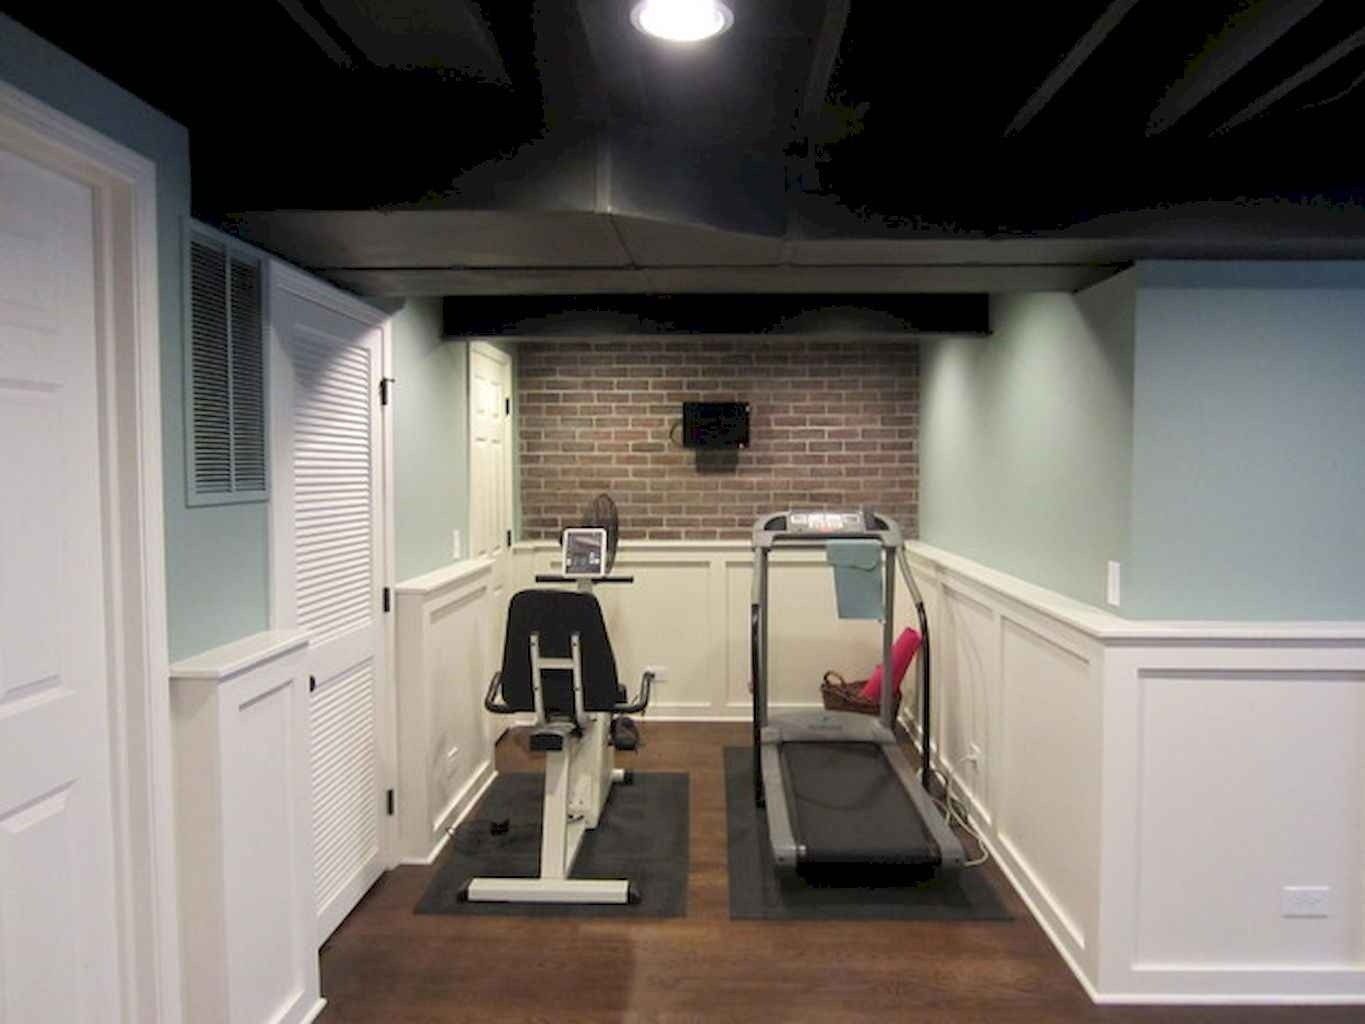 60 Cool Home Gym Ideas Decoration on a Budget for Small Room - 60 Cool Home Gym Ideas Decoration on a Budget for Small Room -   16 small fitness Room ideas